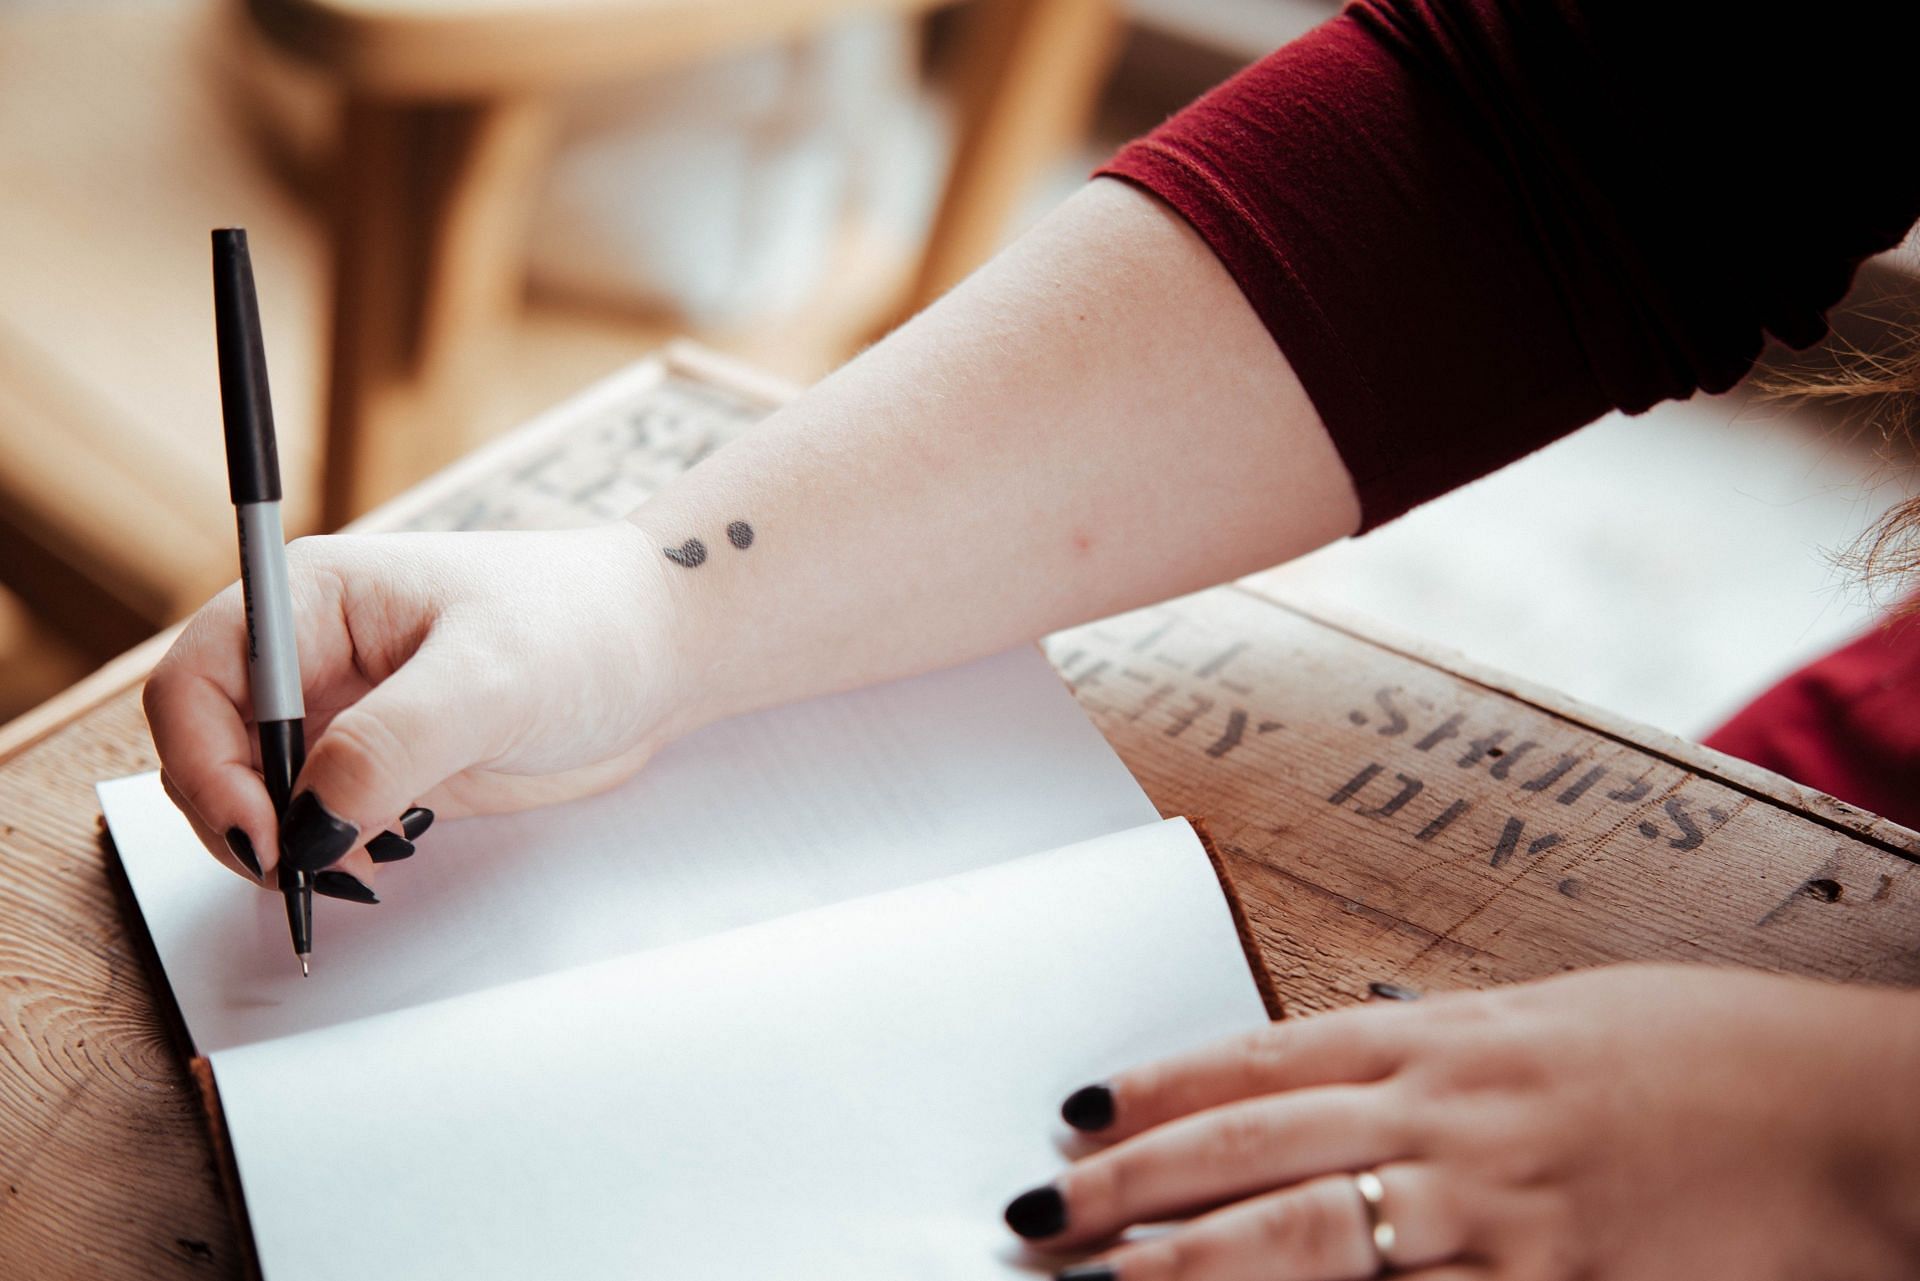 Perhaps mental health tattoos gained momentum because of the semicolon. It brought into light so many experiences. (Image via Unsplash/Timothy I Brock)